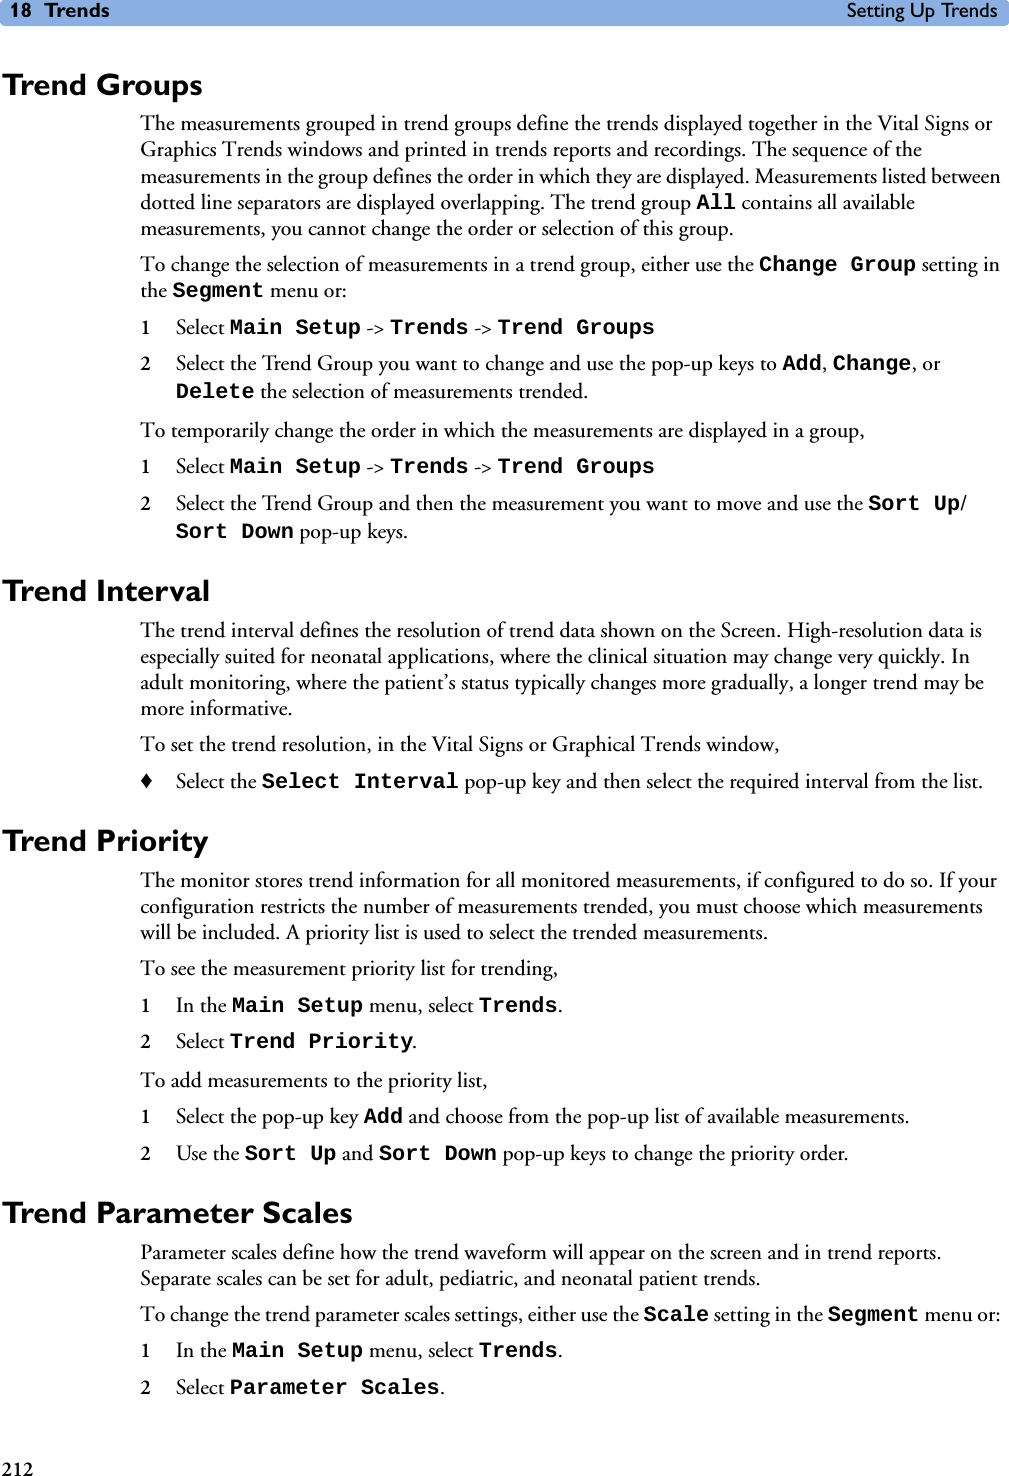 18 Trends Setting Up Trends212Trend GroupsThe measurements grouped in trend groups define the trends displayed together in the Vital Signs or Graphics Trends windows and printed in trends reports and recordings. The sequence of the measurements in the group defines the order in which they are displayed. Measurements listed between dotted line separators are displayed overlapping. The trend group All contains all available measurements, you cannot change the order or selection of this group. To change the selection of measurements in a trend group, either use the Change Group setting in the Segment menu or:1Select Main Setup -&gt; Trends -&gt; Trend Groups2Select the Trend Group you want to change and use the pop-up keys to Add, Change, or Delete the selection of measurements trended. To temporarily change the order in which the measurements are displayed in a group, 1Select Main Setup -&gt; Trends -&gt; Trend Groups2Select the Trend Group and then the measurement you want to move and use the Sort Up/Sort Down pop-up keys. Trend Interval The trend interval defines the resolution of trend data shown on the Screen. High-resolution data is especially suited for neonatal applications, where the clinical situation may change very quickly. In adult monitoring, where the patient’s status typically changes more gradually, a longer trend may be more informative. To set the trend resolution, in the Vital Signs or Graphical Trends window, ♦Select the Select Interval pop-up key and then select the required interval from the list. Trend PriorityThe monitor stores trend information for all monitored measurements, if configured to do so. If your configuration restricts the number of measurements trended, you must choose which measurements will be included. A priority list is used to select the trended measurements. To see the measurement priority list for trending, 1In the Main Setup menu, select Trends.2Select Trend Priority. To add measurements to the priority list, 1Select the pop-up key Add and choose from the pop-up list of available measurements. 2Use the Sort Up and Sort Down pop-up keys to change the priority order. Trend Parameter ScalesParameter scales define how the trend waveform will appear on the screen and in trend reports. Separate scales can be set for adult, pediatric, and neonatal patient trends. To change the trend parameter scales settings, either use the Scale setting in the Segment menu or: 1In the Main Setup menu, select Trends.2Select Parameter Scales. 